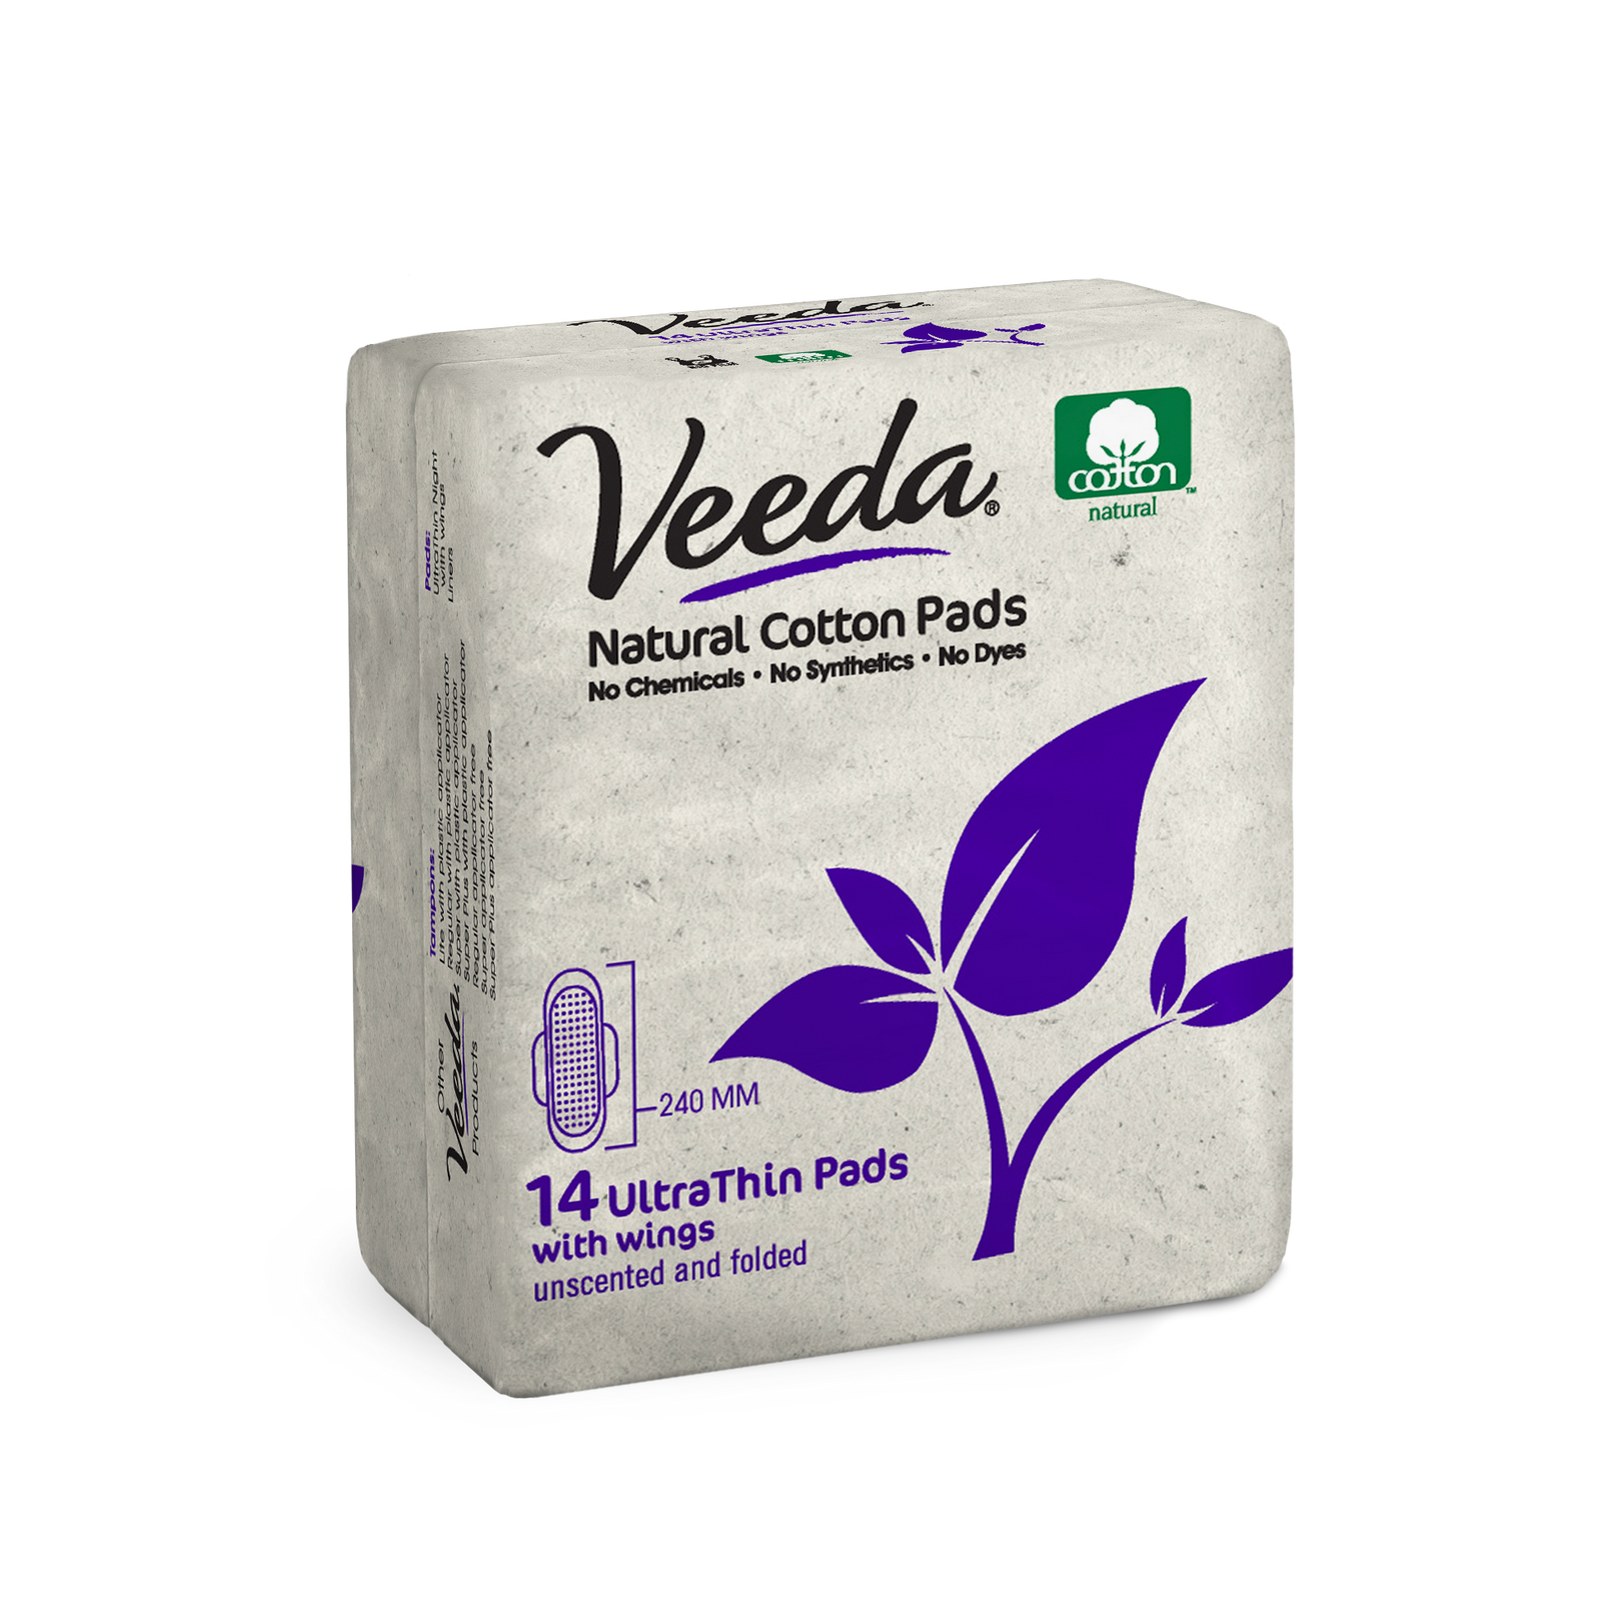 Feel fresh all day with Veeda Liners! 